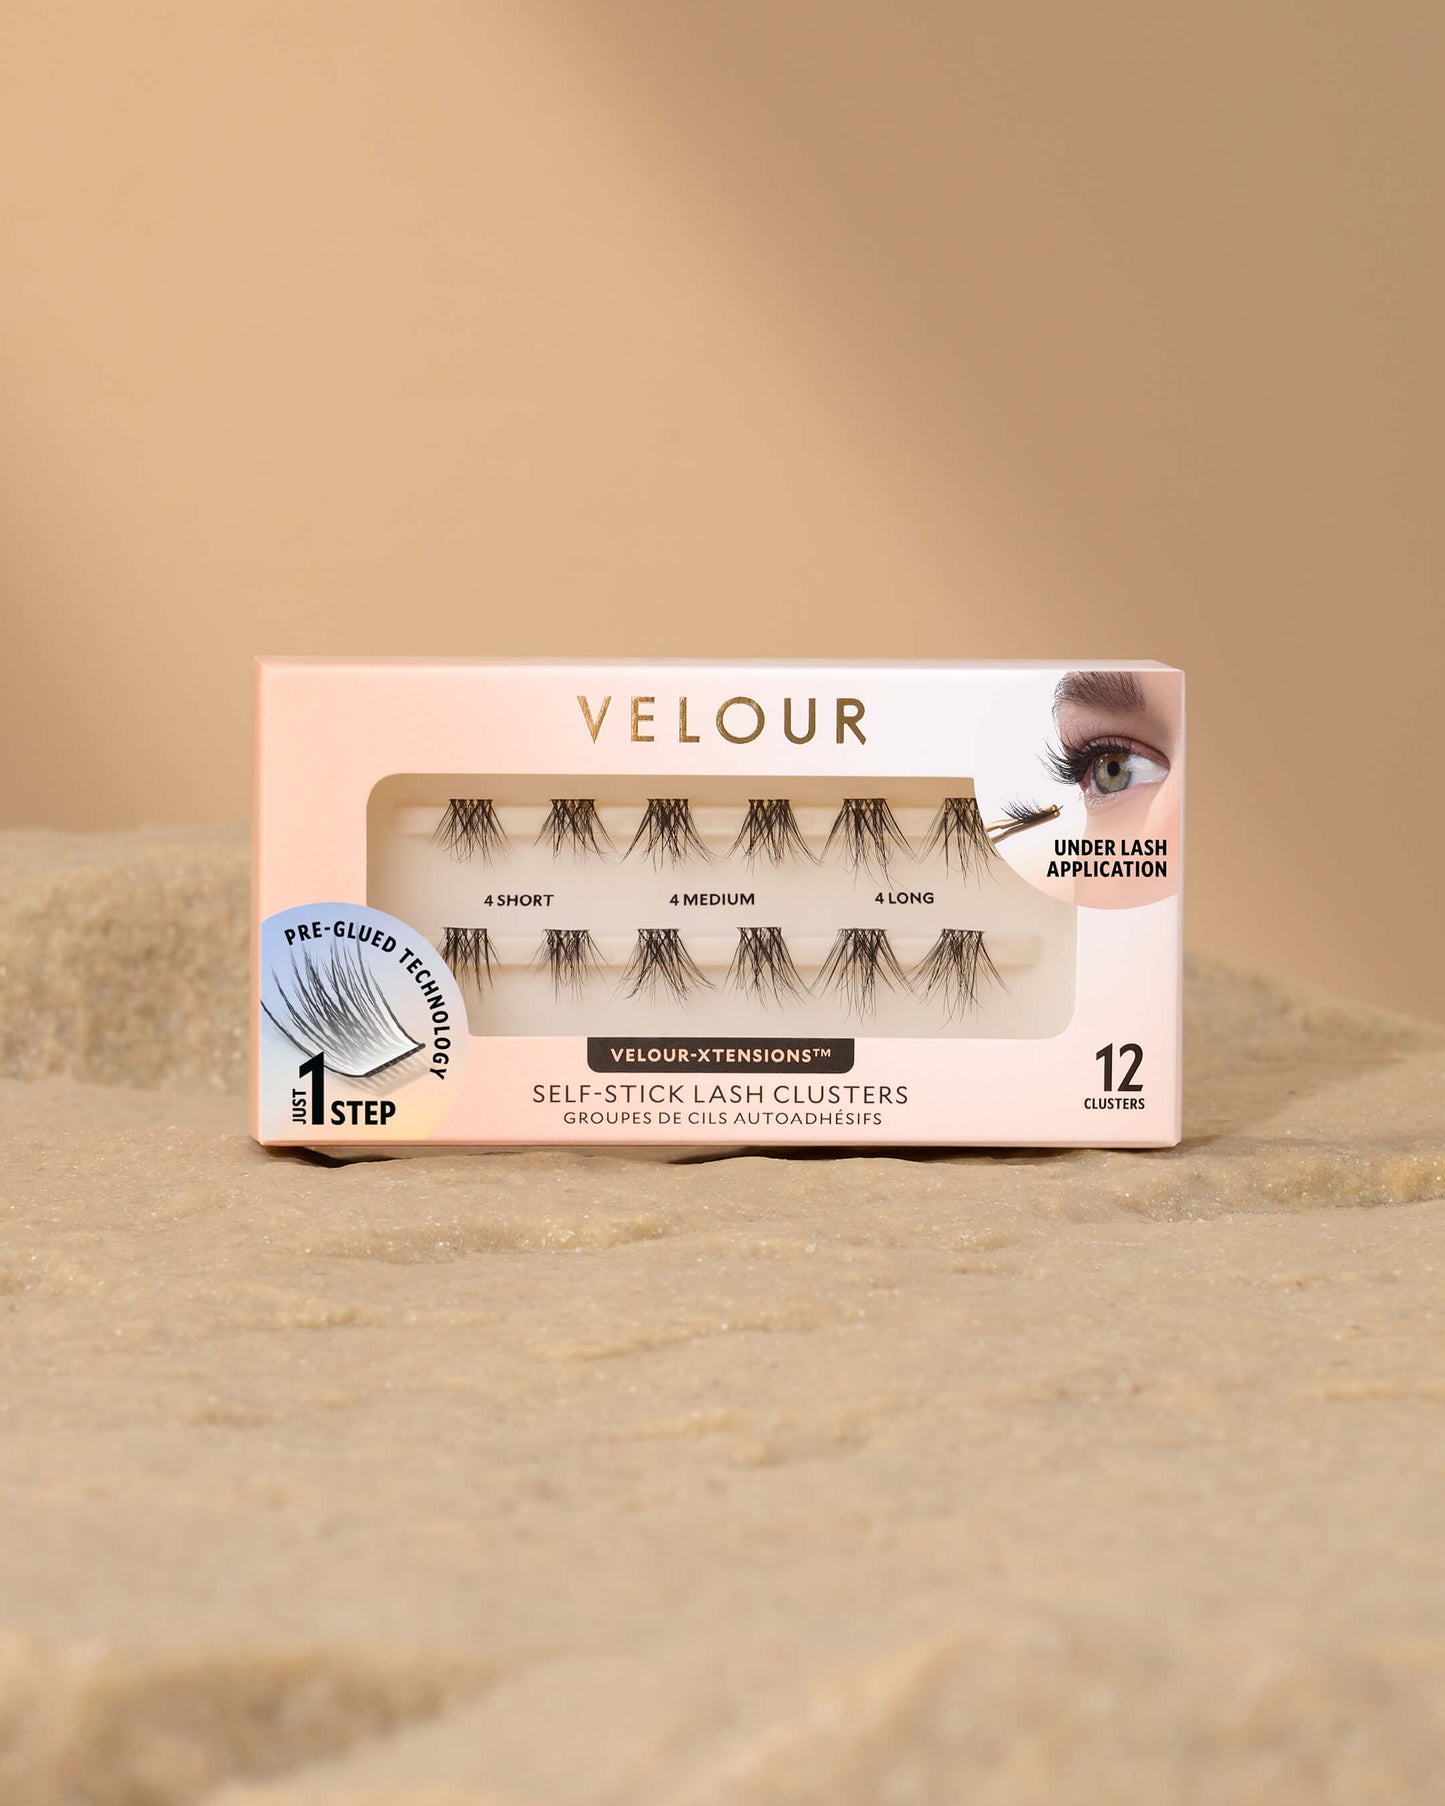 Everyday Natural Velour-Xtensions™ Self-Stick Lash Clusters